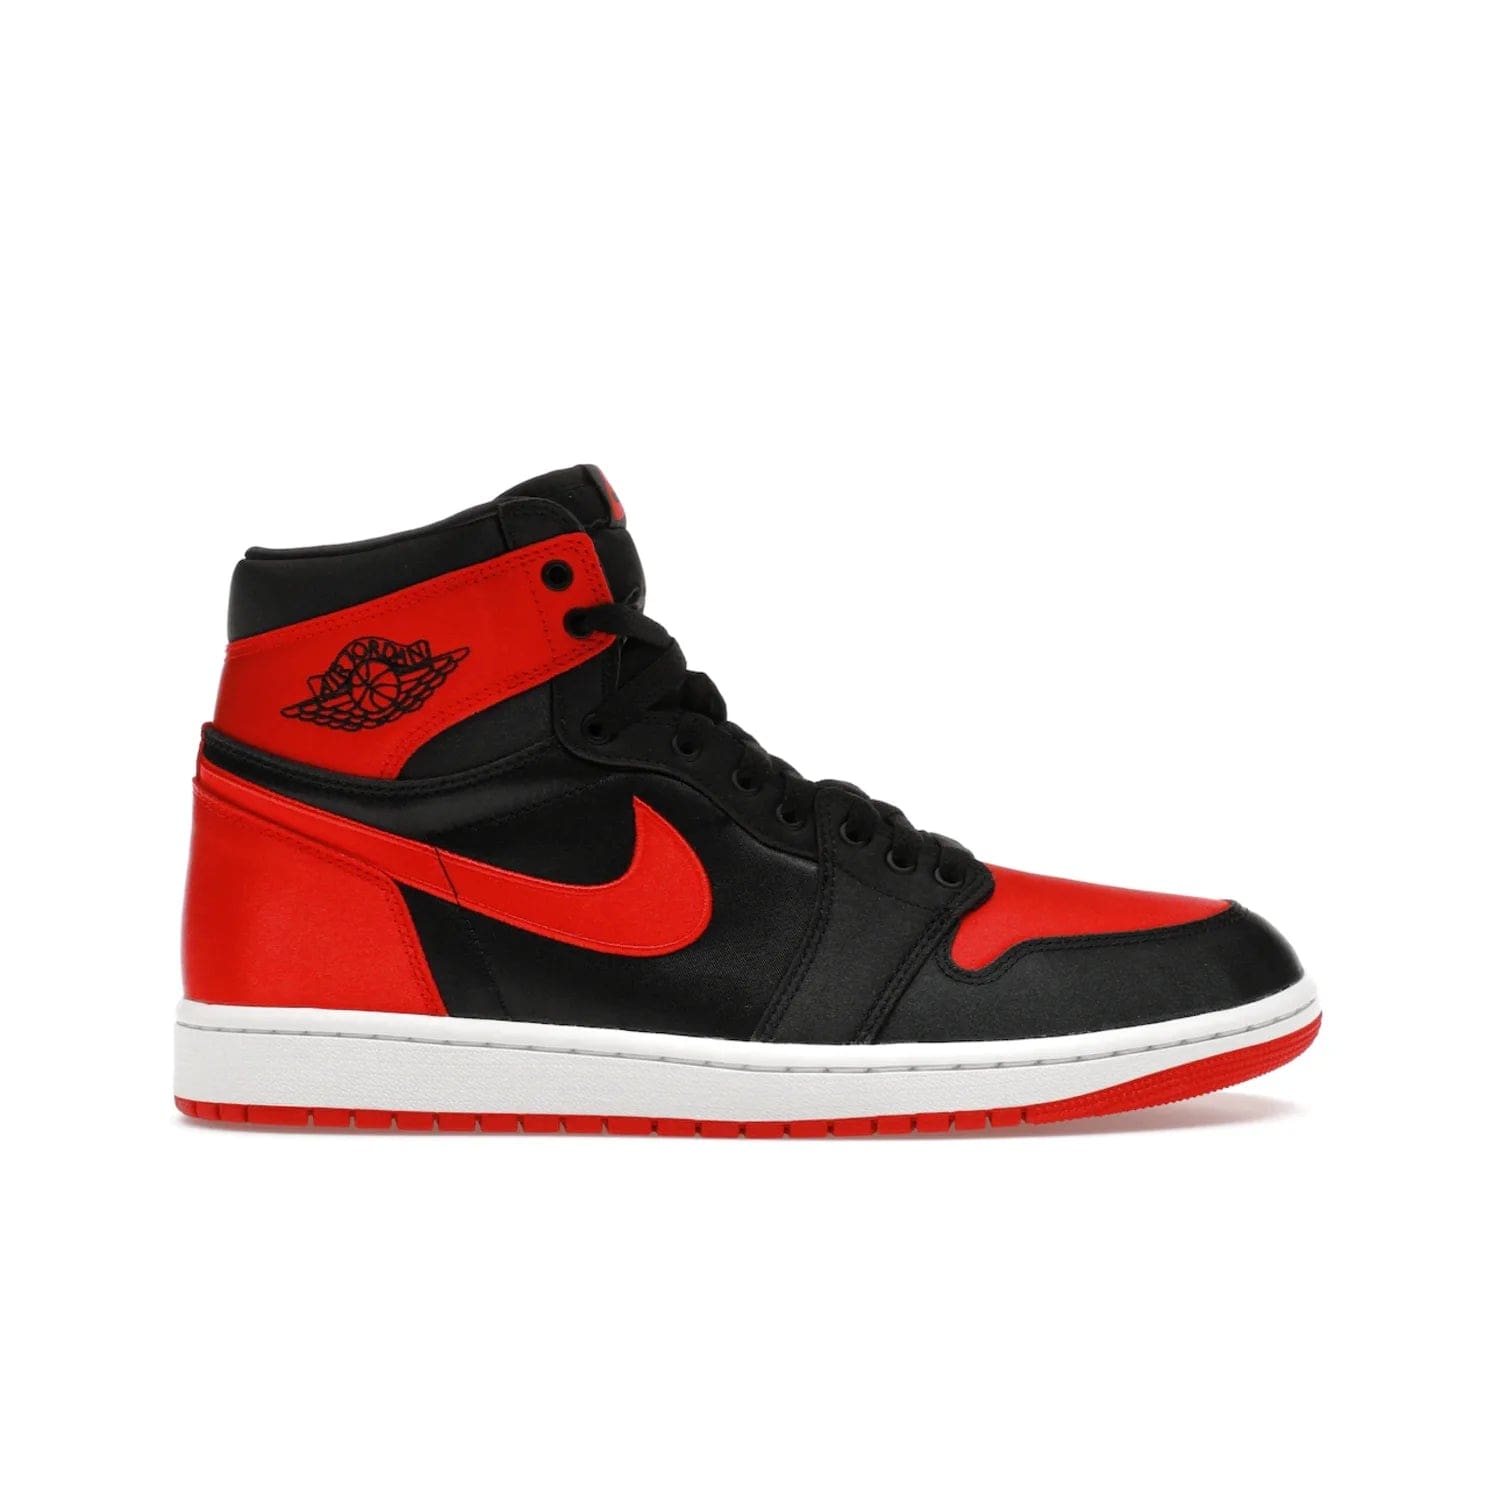 Jordan 1 Retro High OG Satin Bred (Women's) - Image 1 - Only at www.BallersClubKickz.com - Introducing the Jordan 1 Retro High OG Satin Bred (Women's). Luxe satin finish, contrasting hues & classic accents. Trending sneakers symbolizing timelessness & heritage. Make a bold statement with this iconic shoe. Available October 4, 2023.